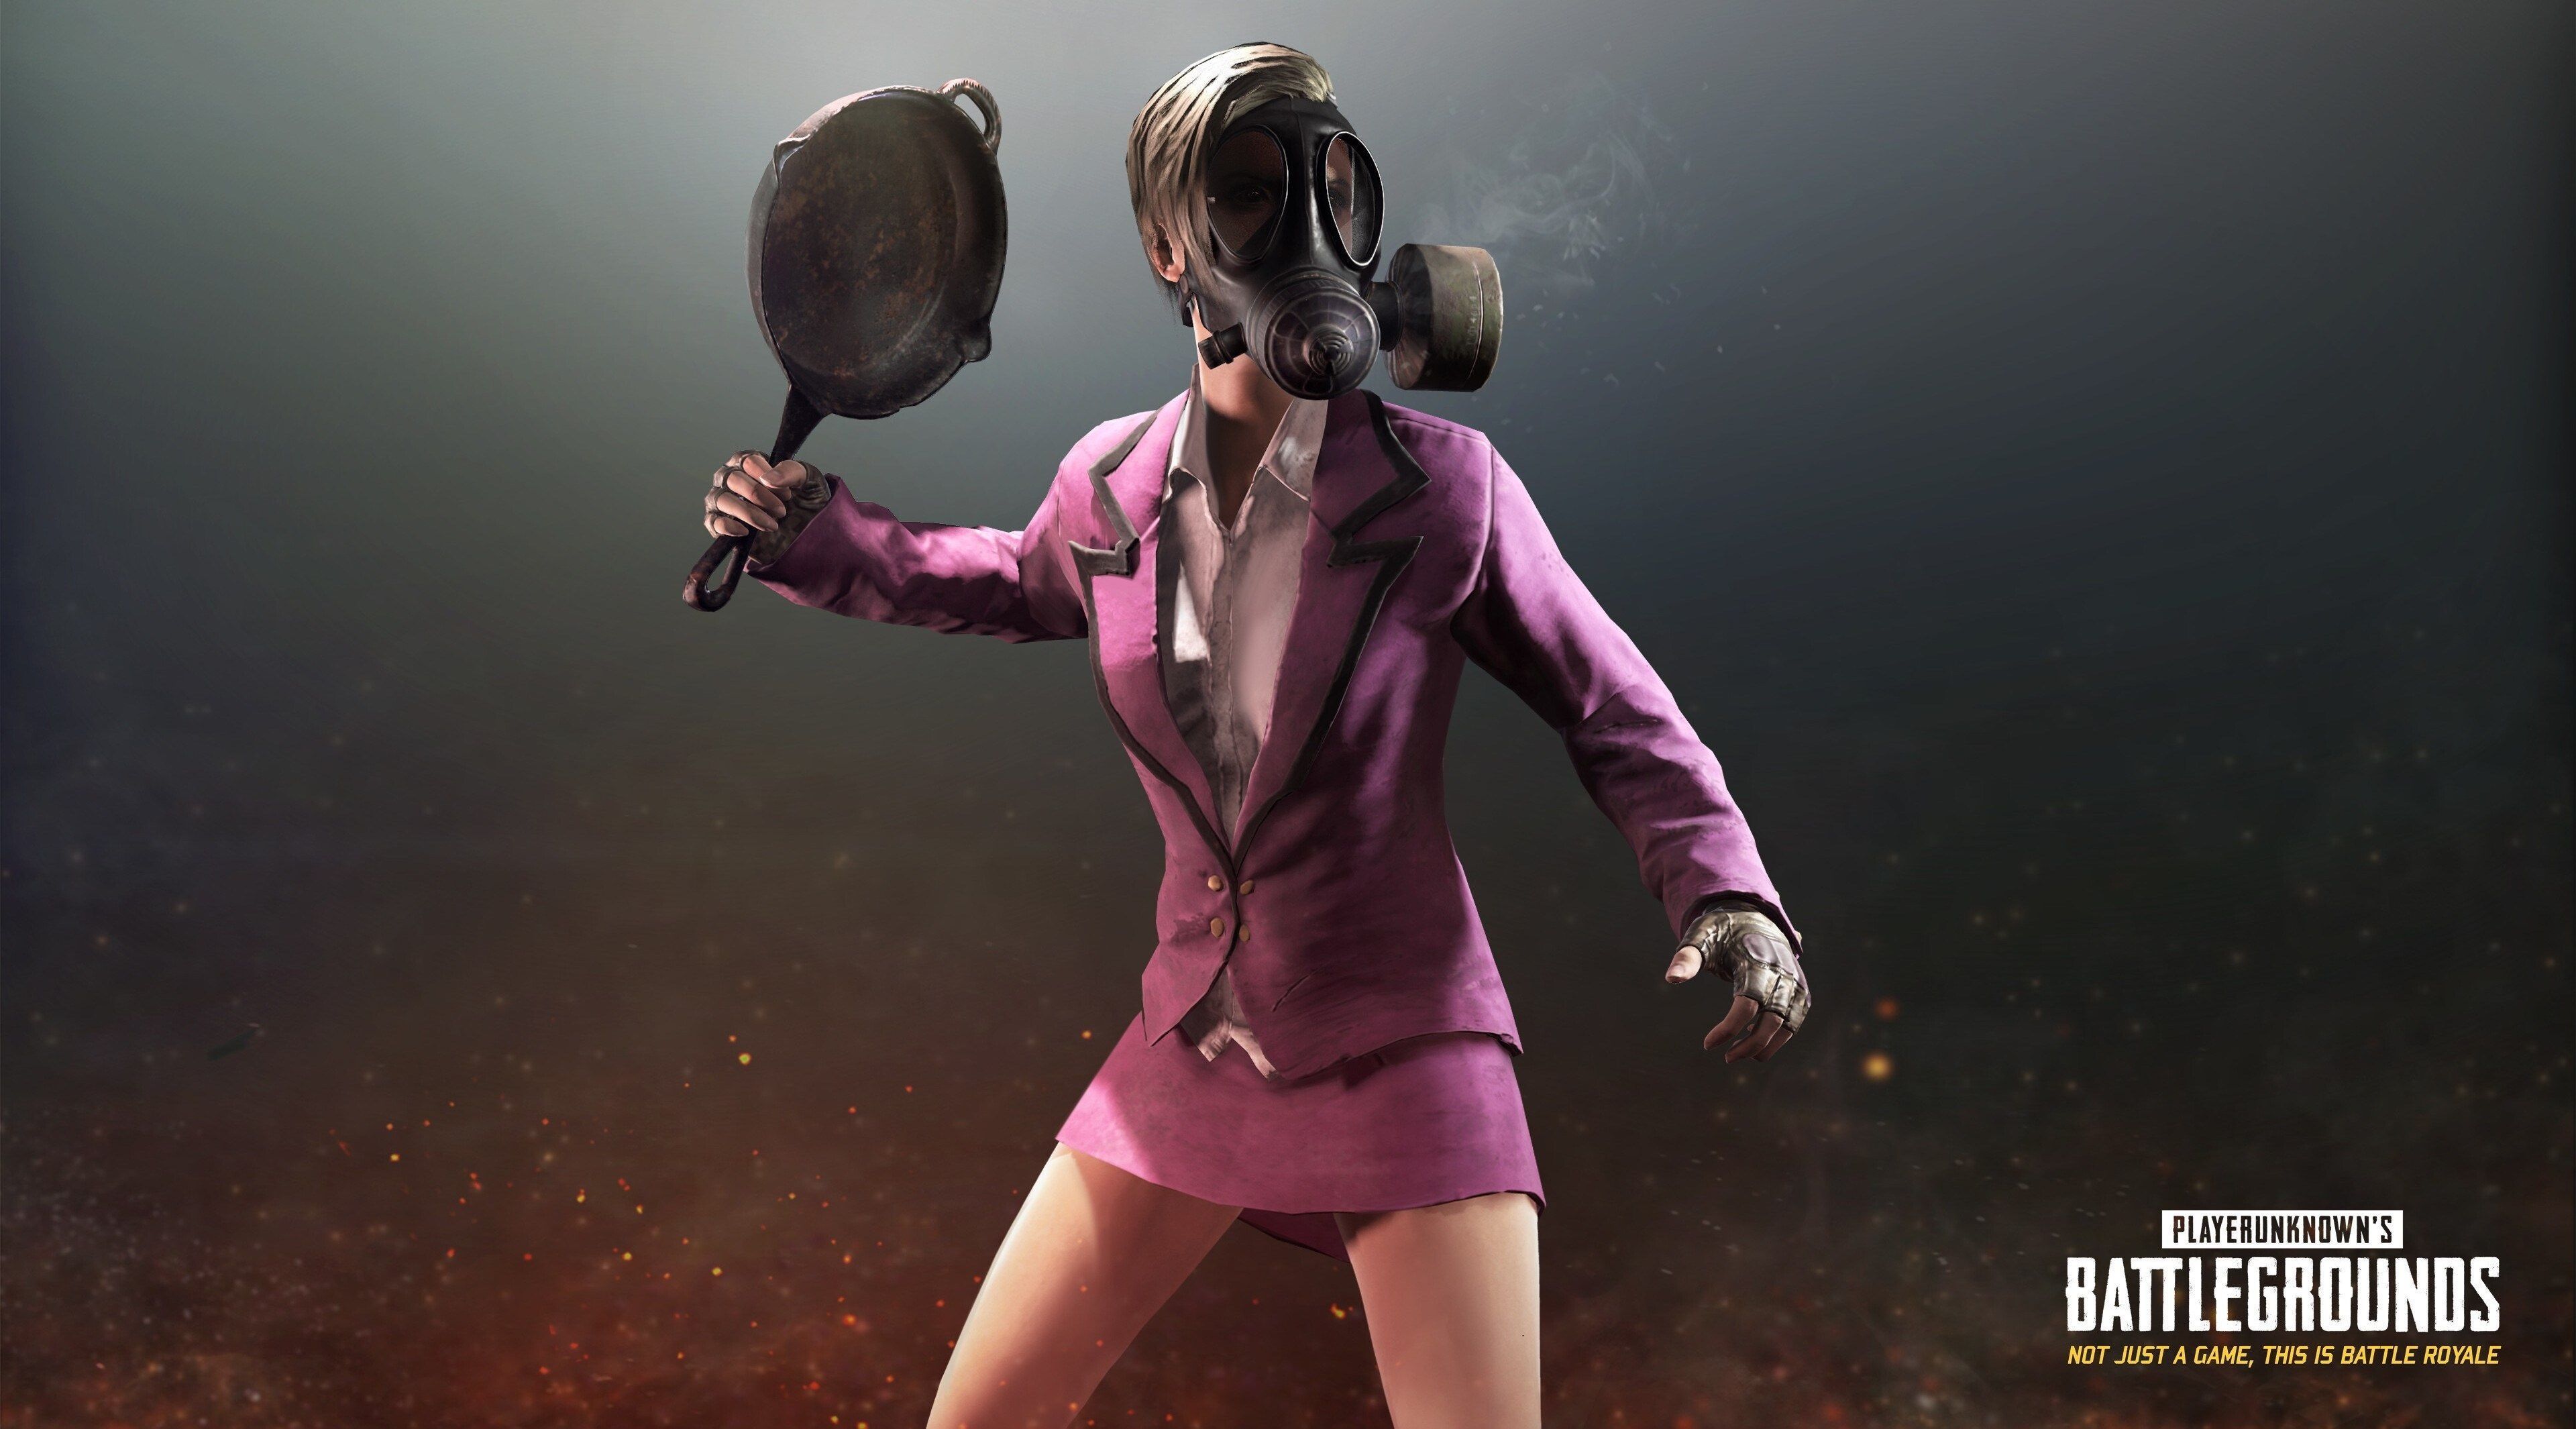 Pubg Girl Wallpapers posted by John Tremblay